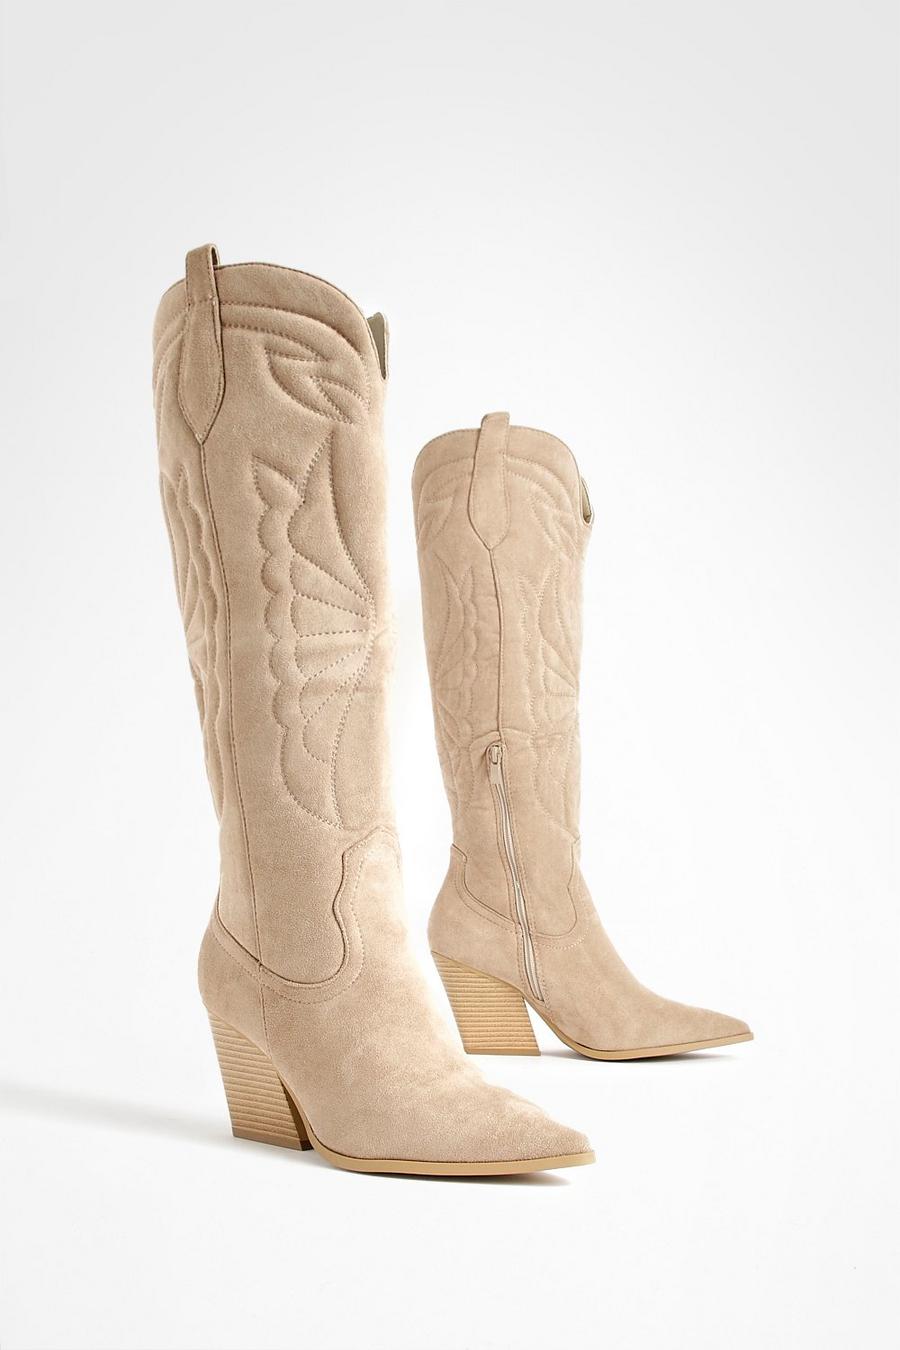 Taupe beige Embroidered Tab Detail Knee Western Cowboy Boots